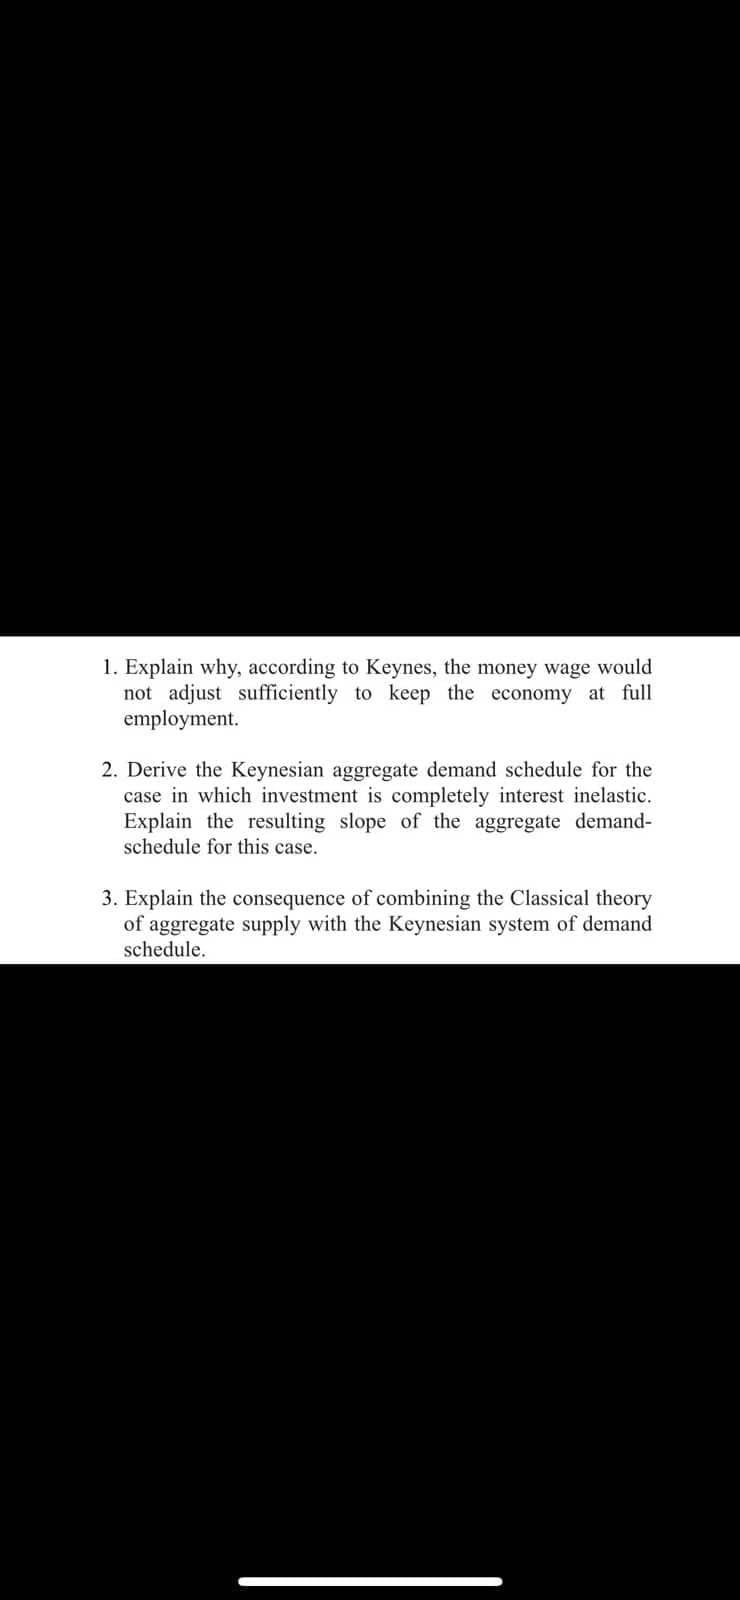 1. Explain why, according to Keynes, the money wage would
not adjust sufficiently to keep the economy at full
employment.
2. Derive the Keynesian aggregate demand schedule for the
case in which investment is completely interest inelastic.
Explain the resulting slope of the aggregate demand-
schedule for this case.
3. Explain the consequence of combining the Classical theory
of aggregate supply with the Keynesian system of demand
schedule.
